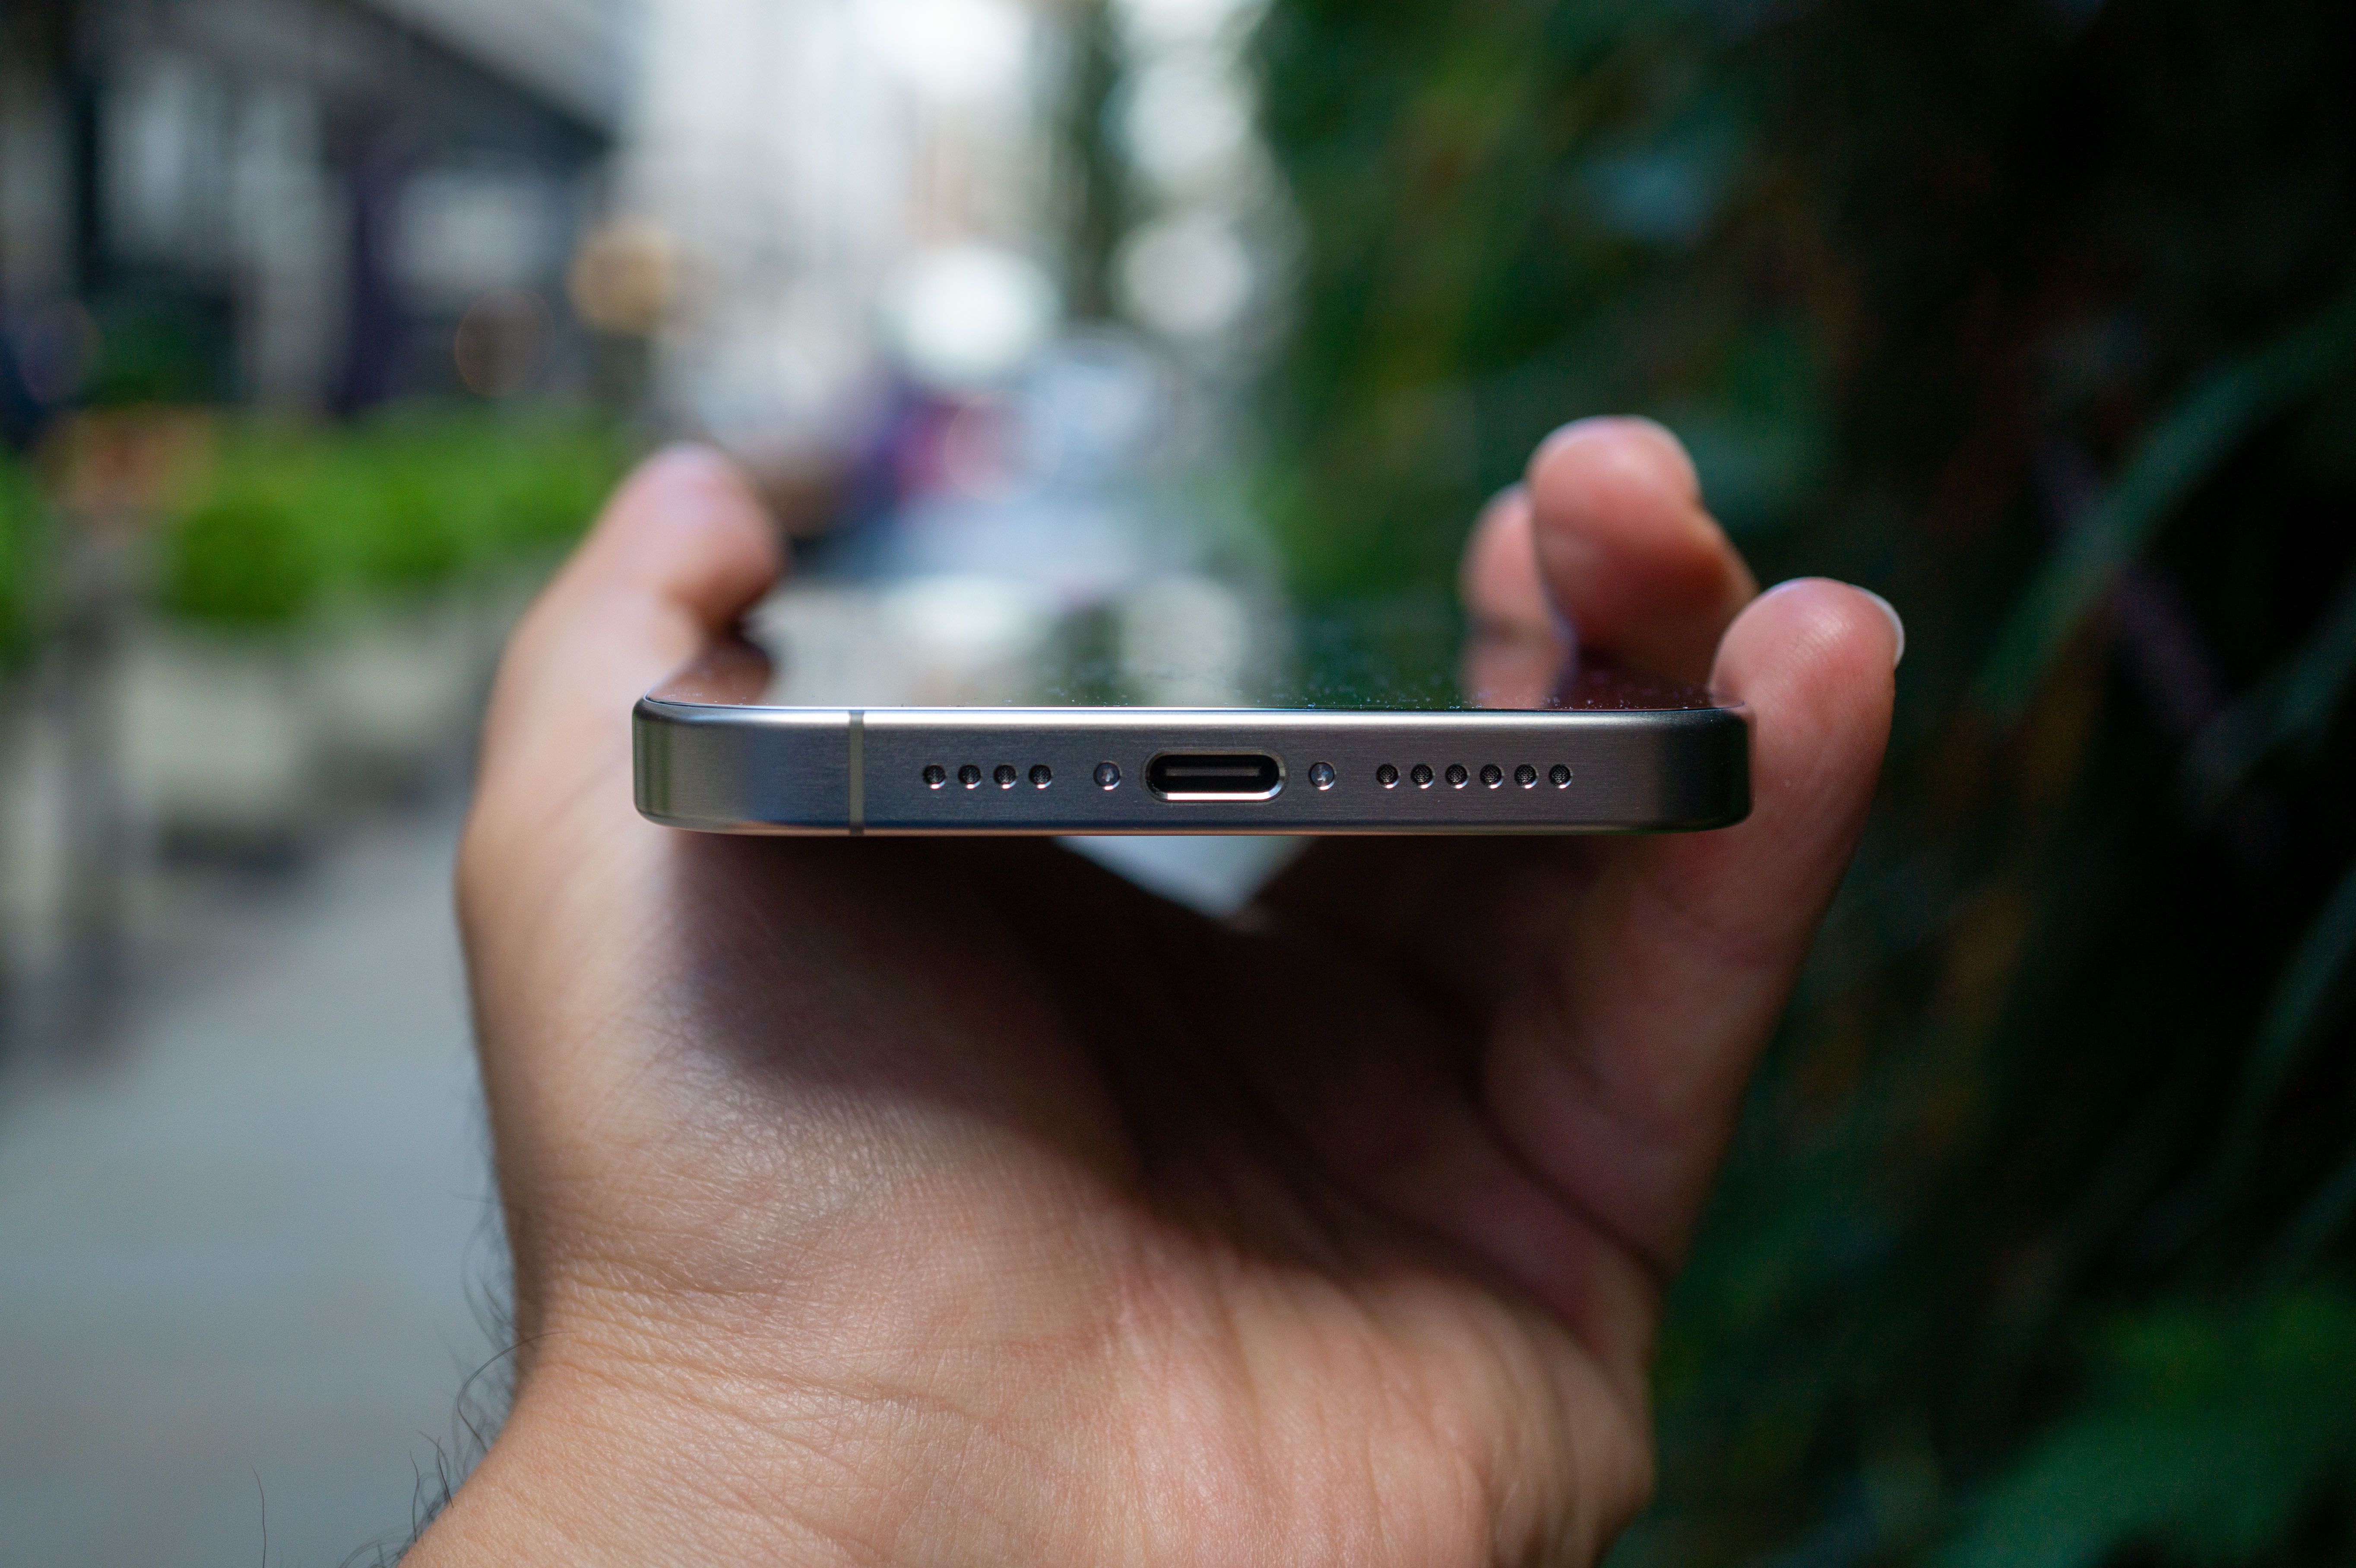 iPhone 15 Pro Max Review: All the Top Features in a Sleek Titanium Casing